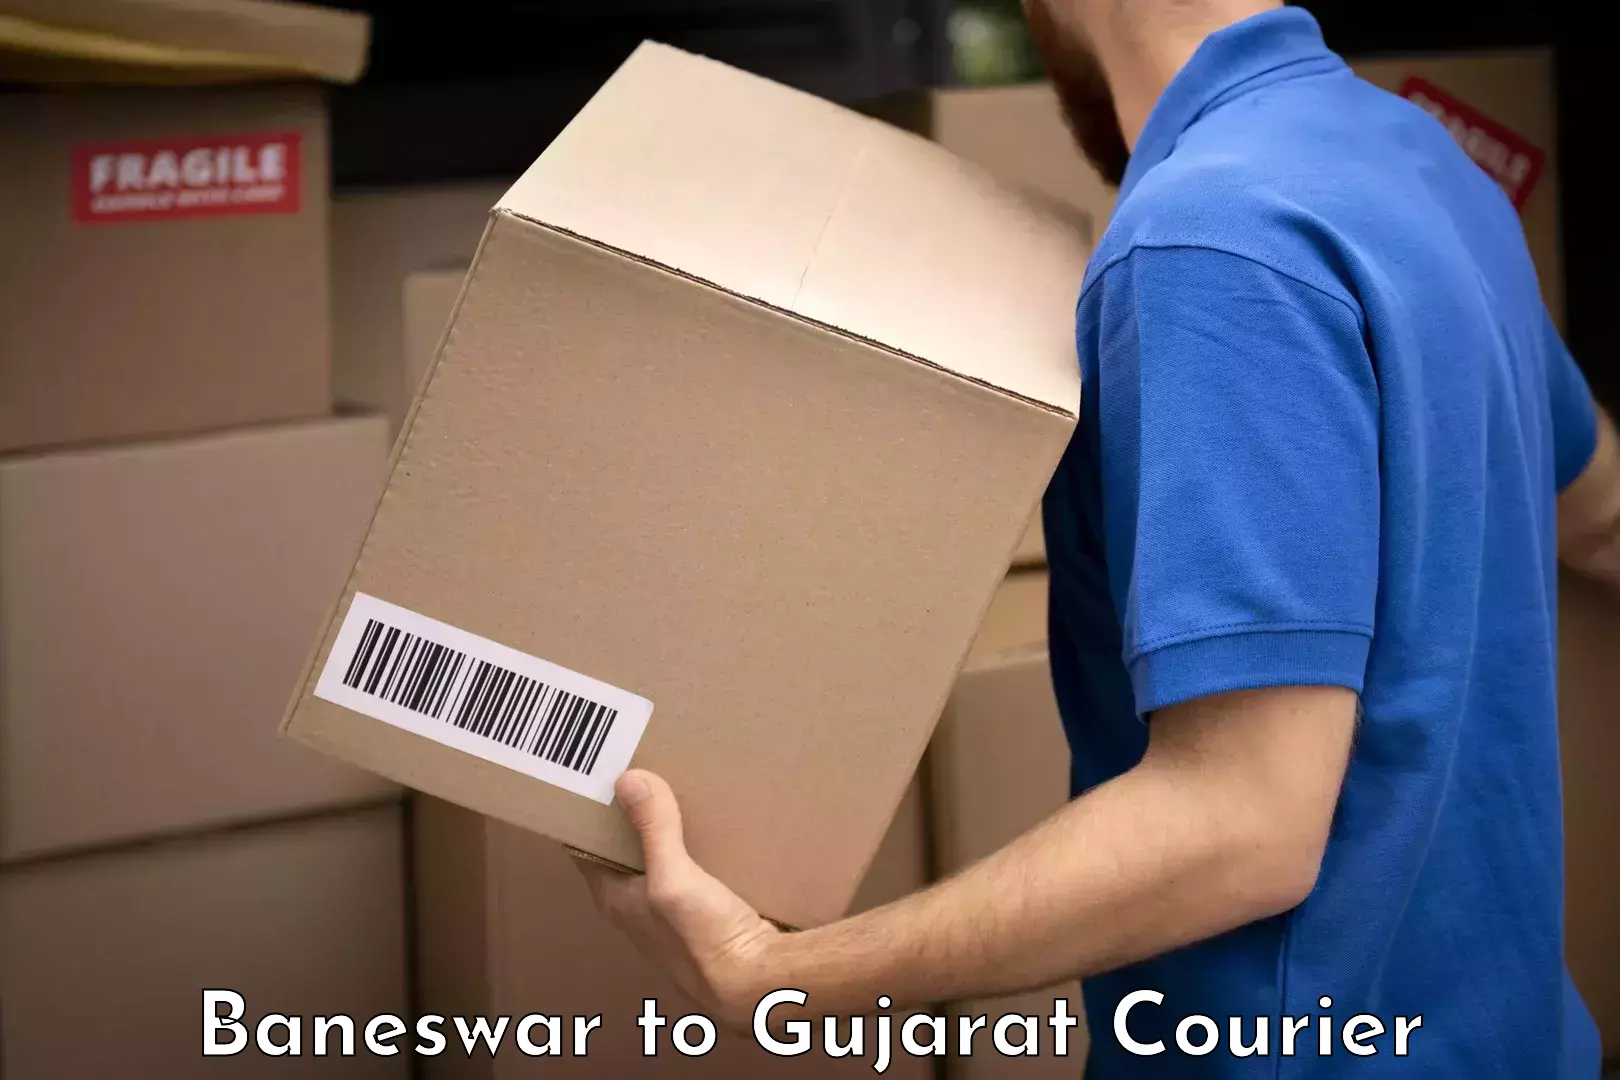 Luggage delivery providers Baneswar to Gujarat